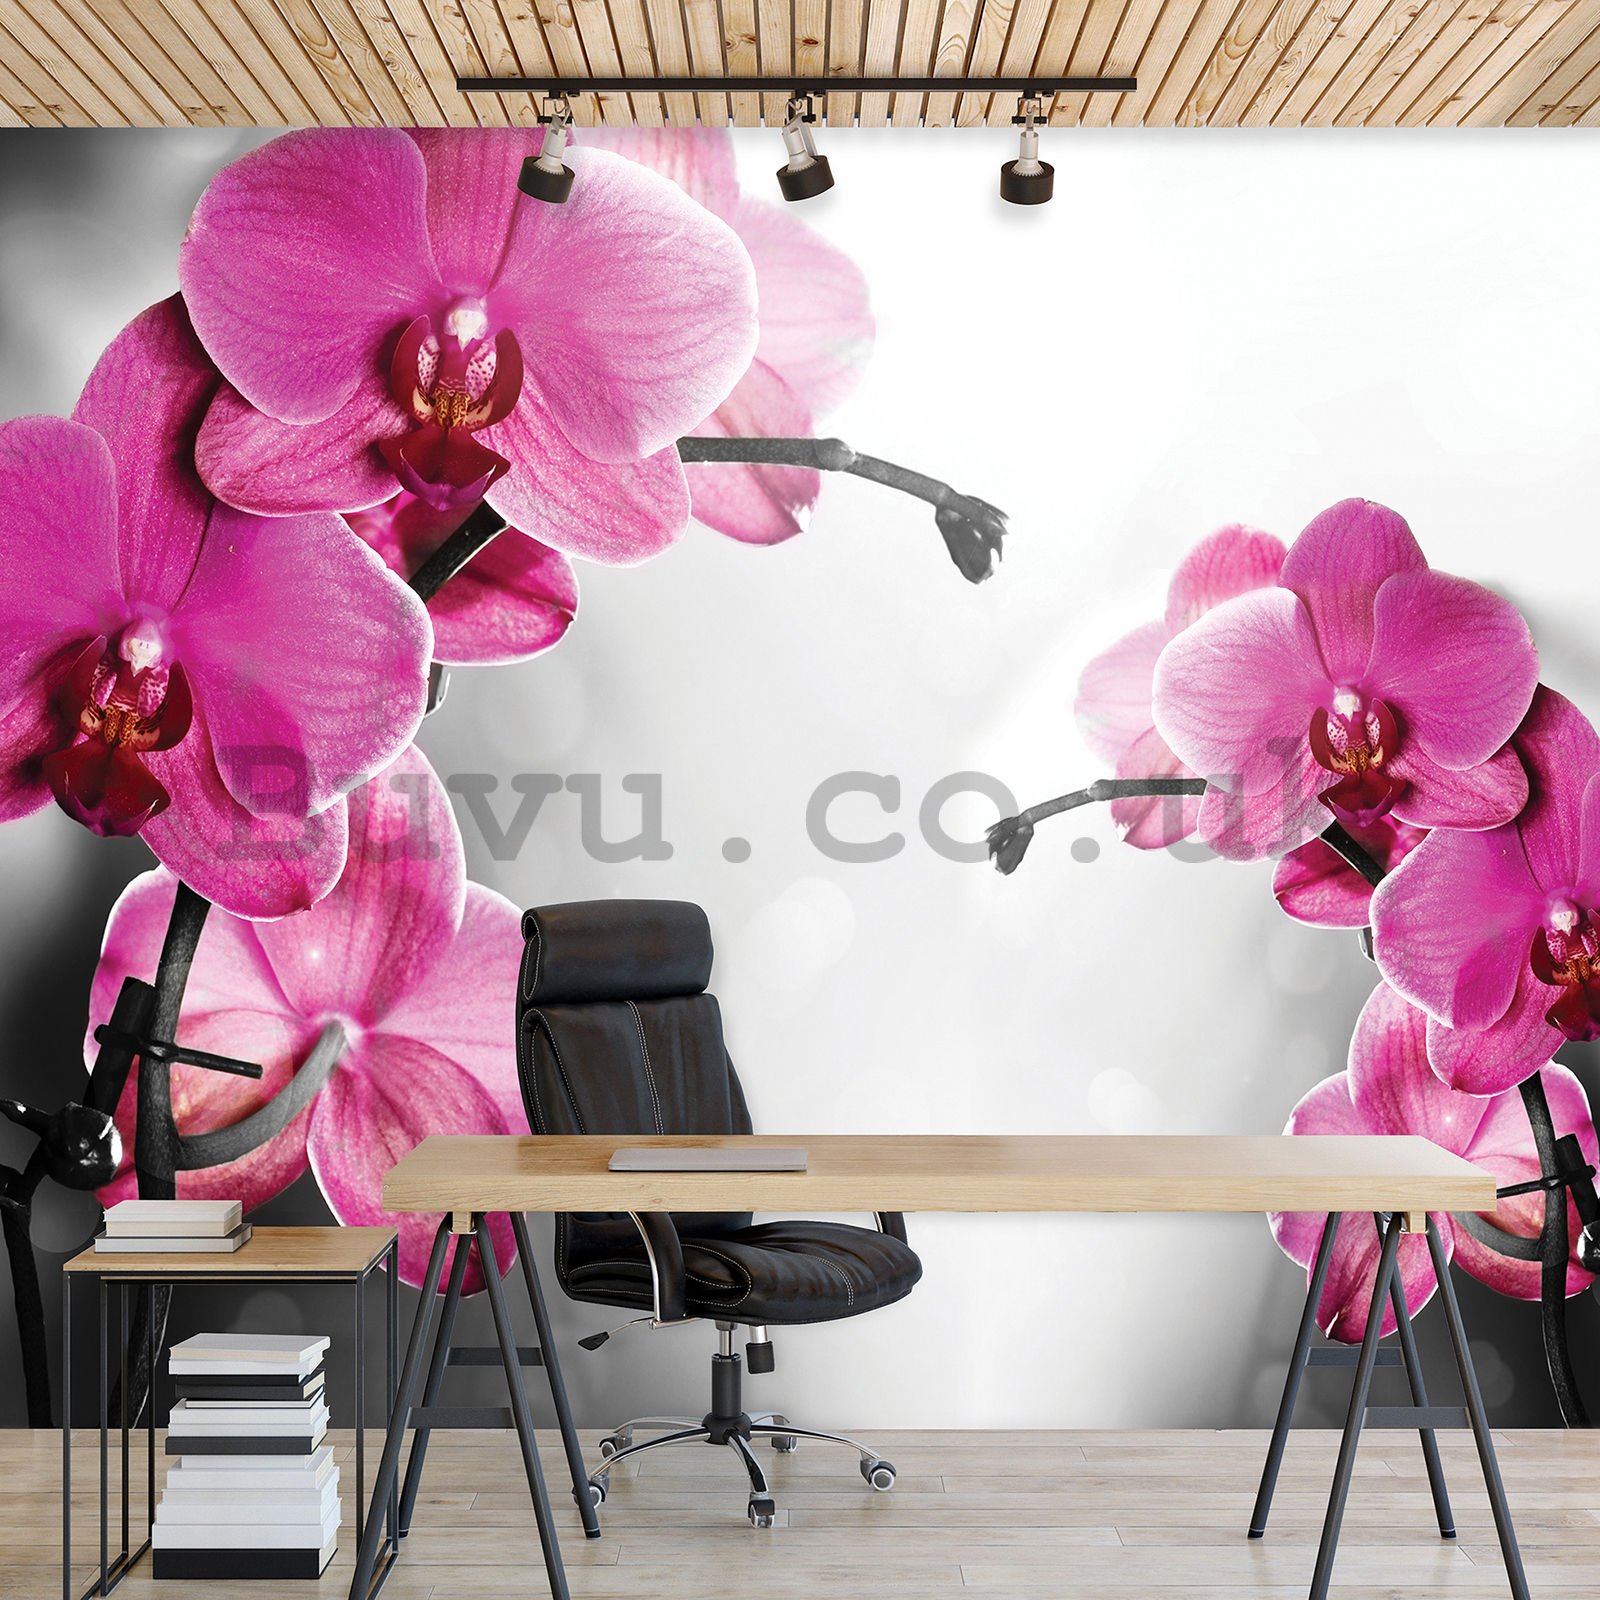 Wall mural vlies: Orchid on grey background - 152,5x104 cm